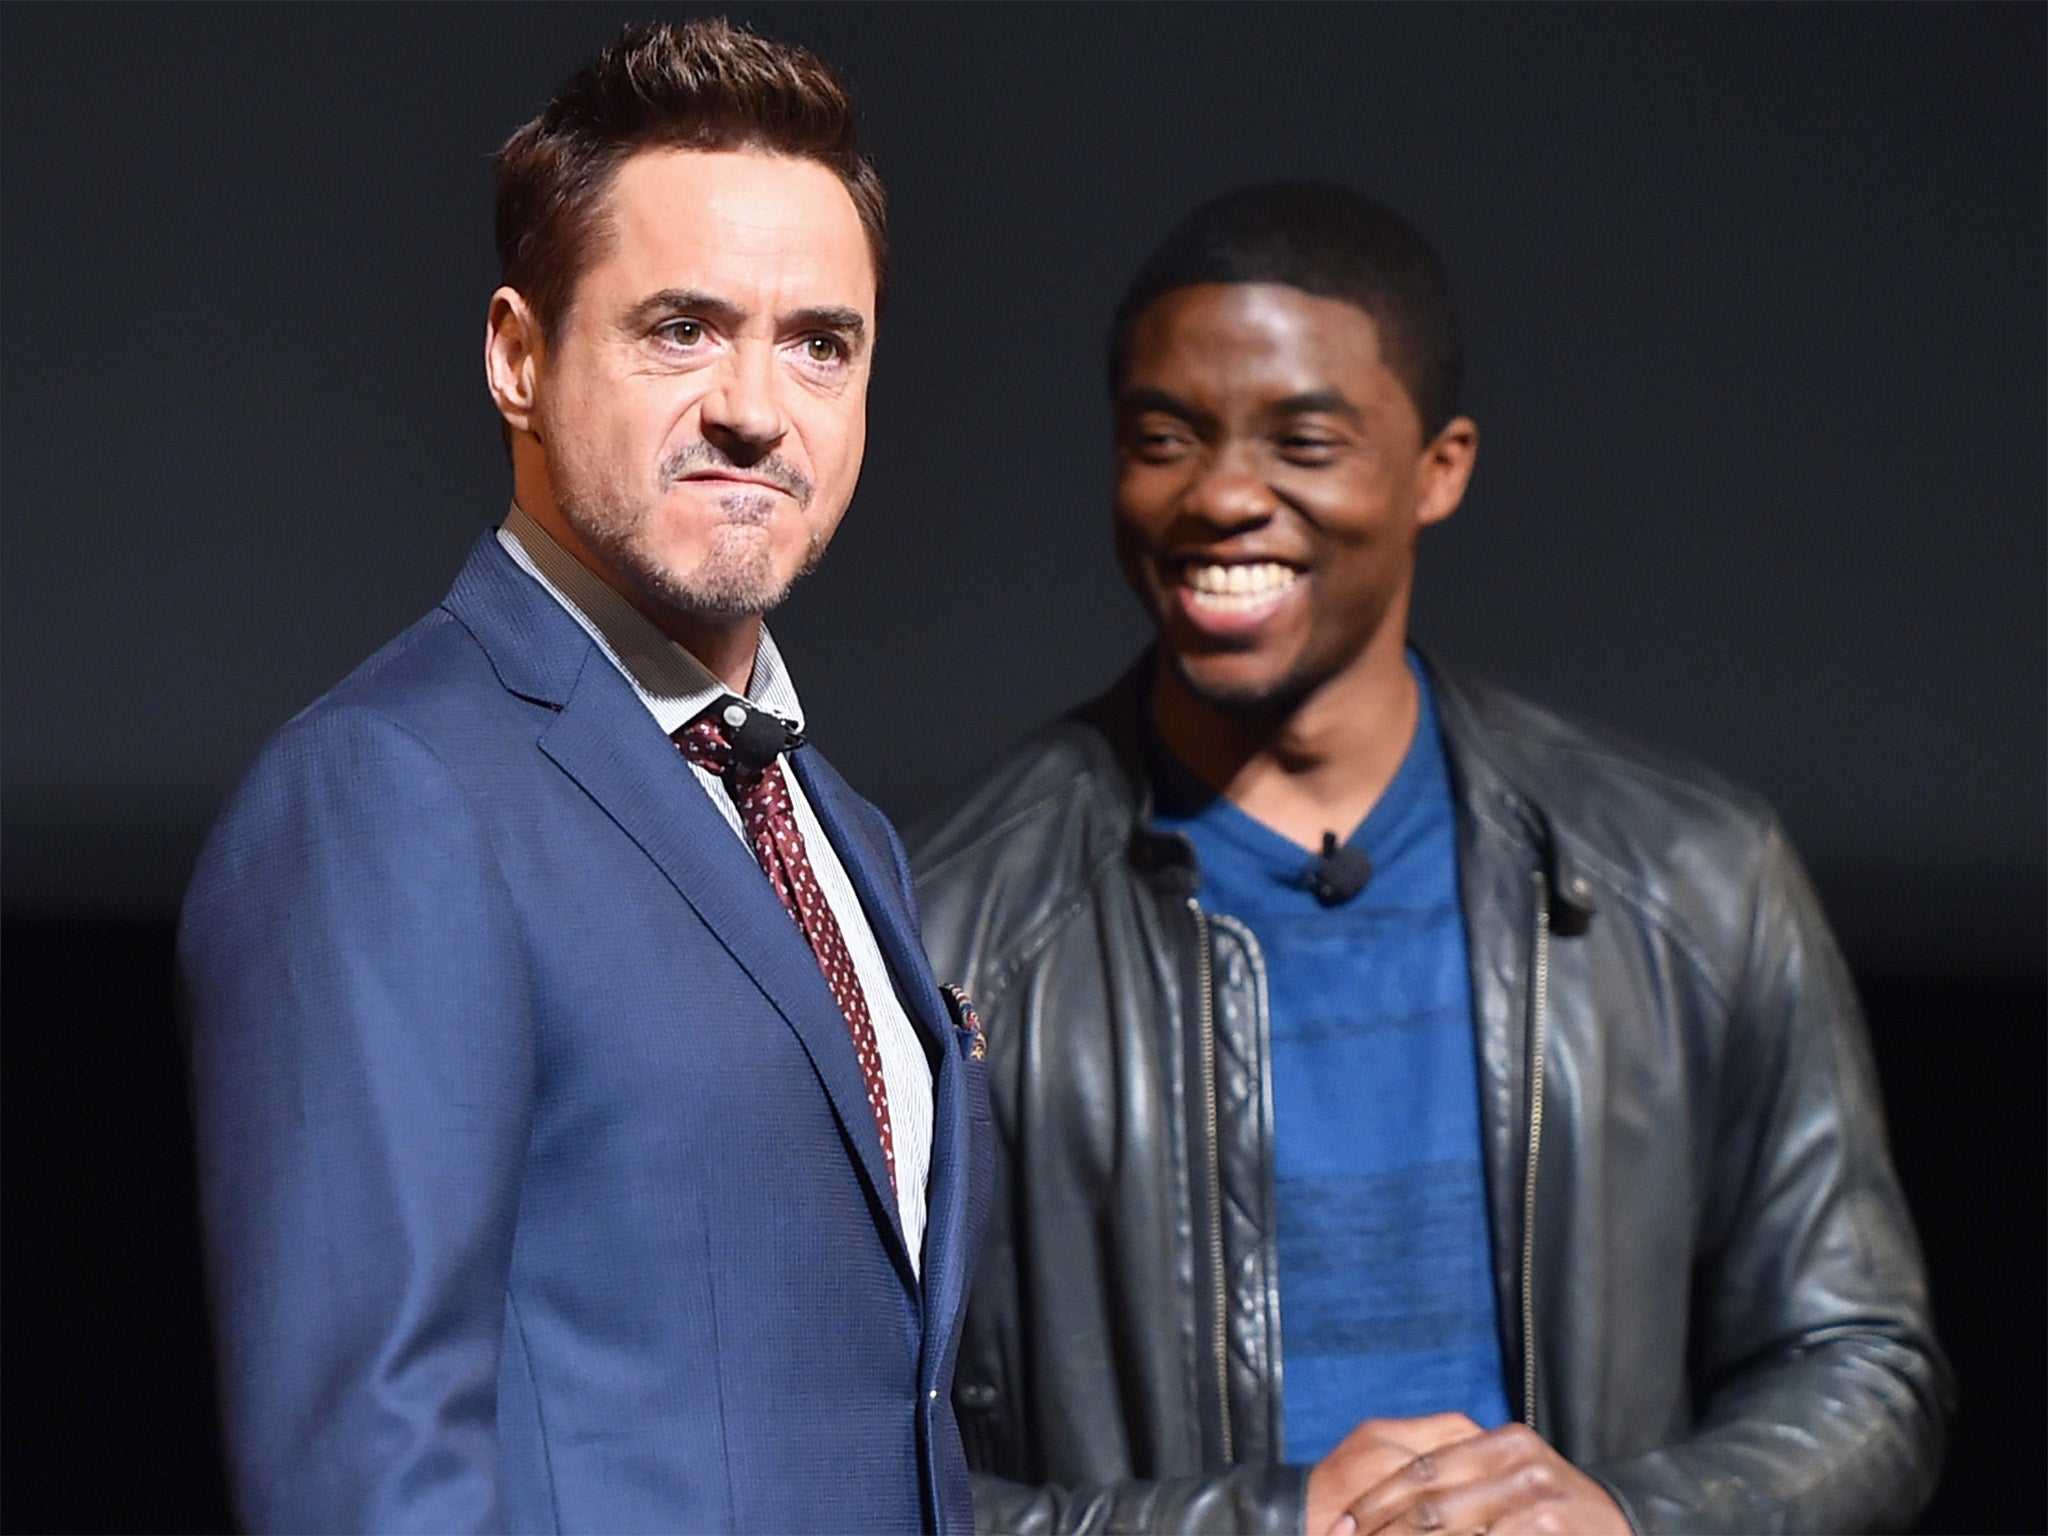 Robert Downey Jr with Chadwick Boseman - who will play Black Panther in a movie due for released in 2017 - onstage during Marvel Studios fan event at The El Capitan Theatre in Los Angeles, California